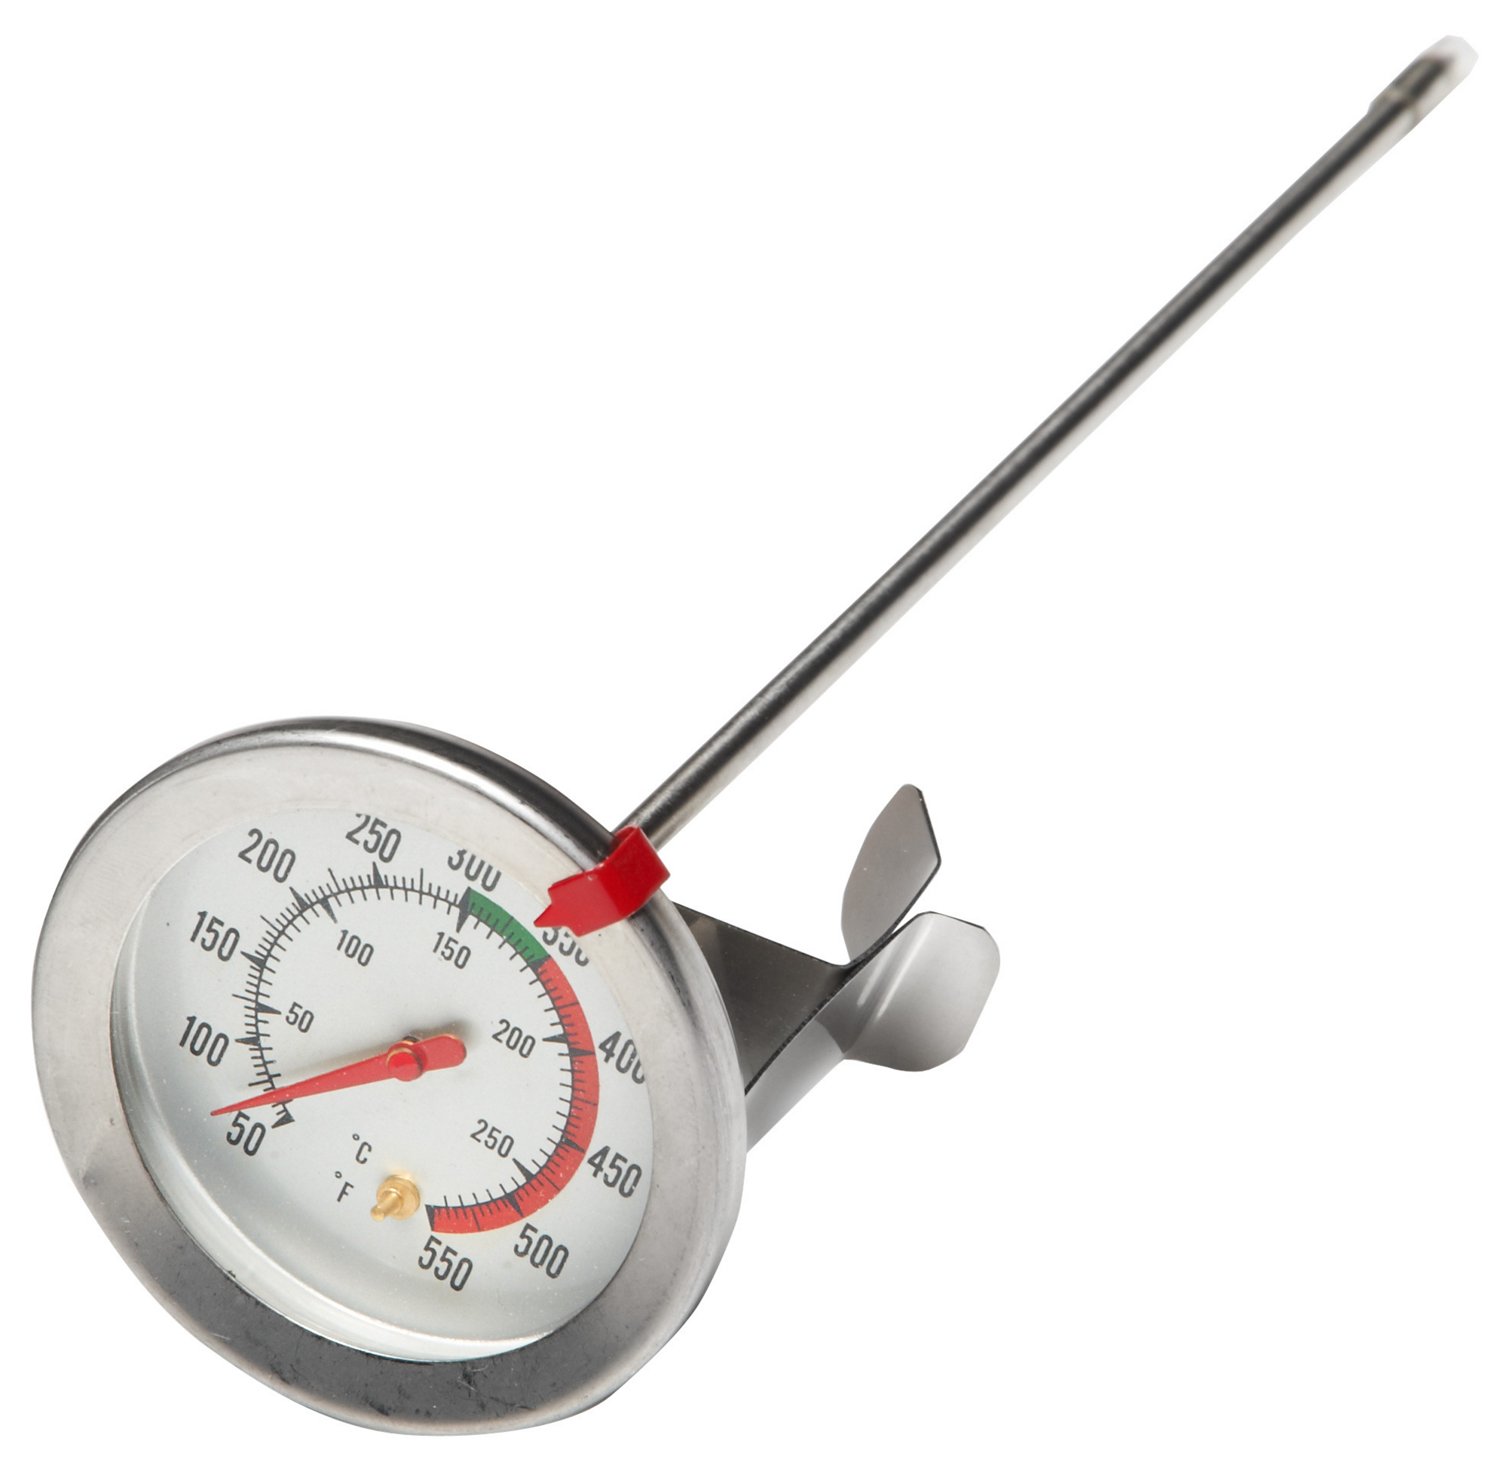 Othmro Oven/Grill/Smoker Monitoring Thermometer 0-300C Stainless Steel Instant Read Temperature Gauge for Kitchen Use 1pcs 